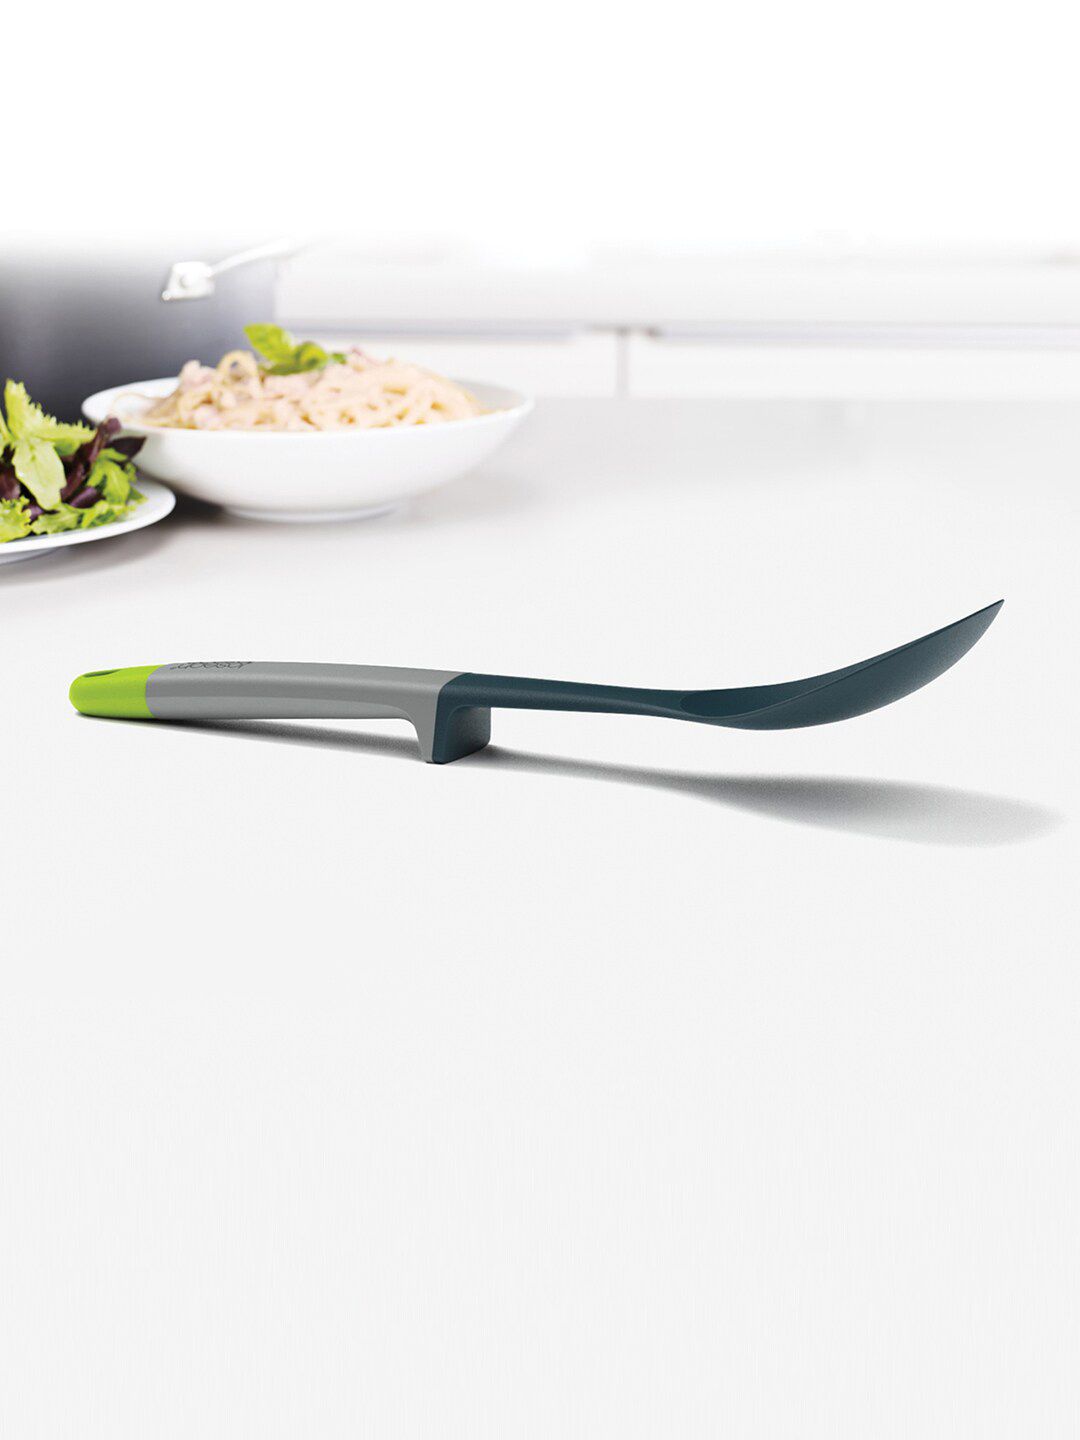 Joseph Joseph Grey & Green Elevate Nylon Solid Spoon With Integrated Tool Rest Price in India